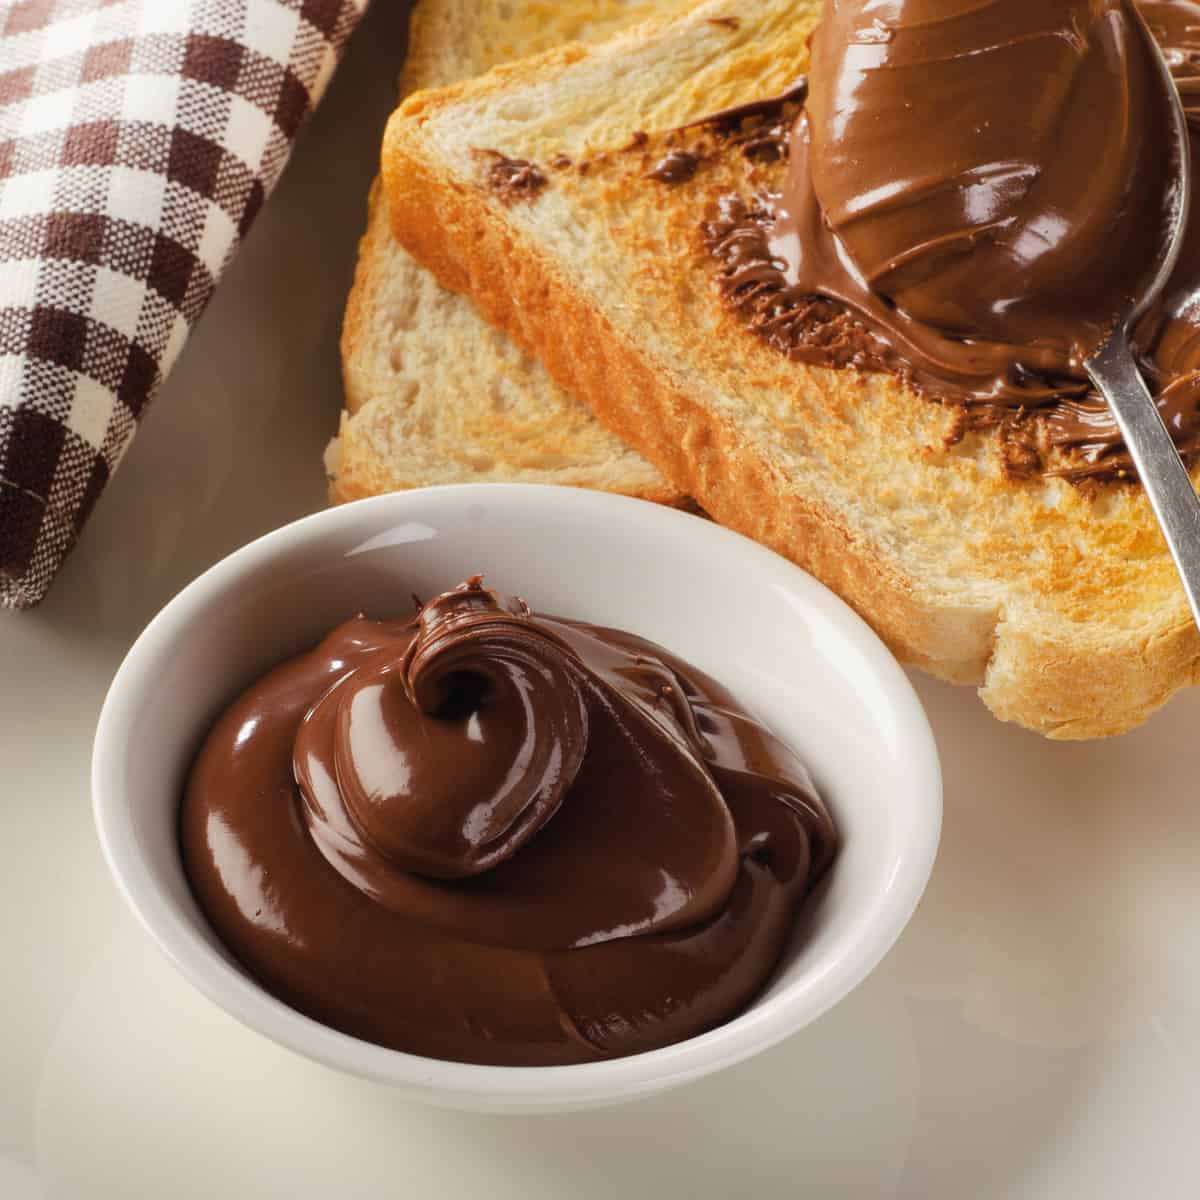 Toasts with chocolate spread